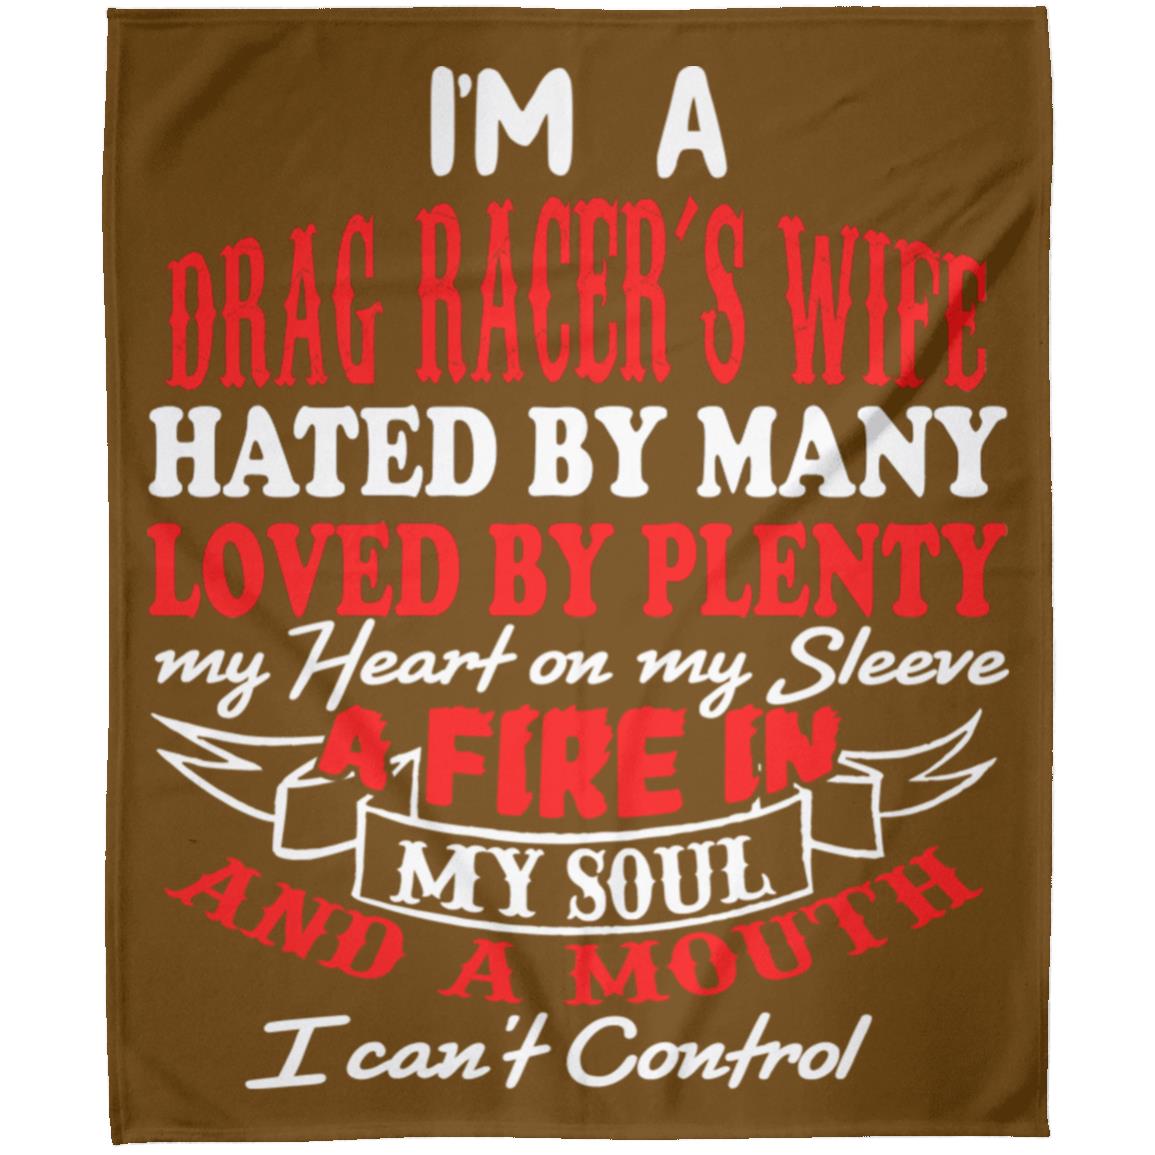 I'm A Drag Racer's Wife Hated By Many Loved By Plenty Arctic Fleece Blanket 50x60